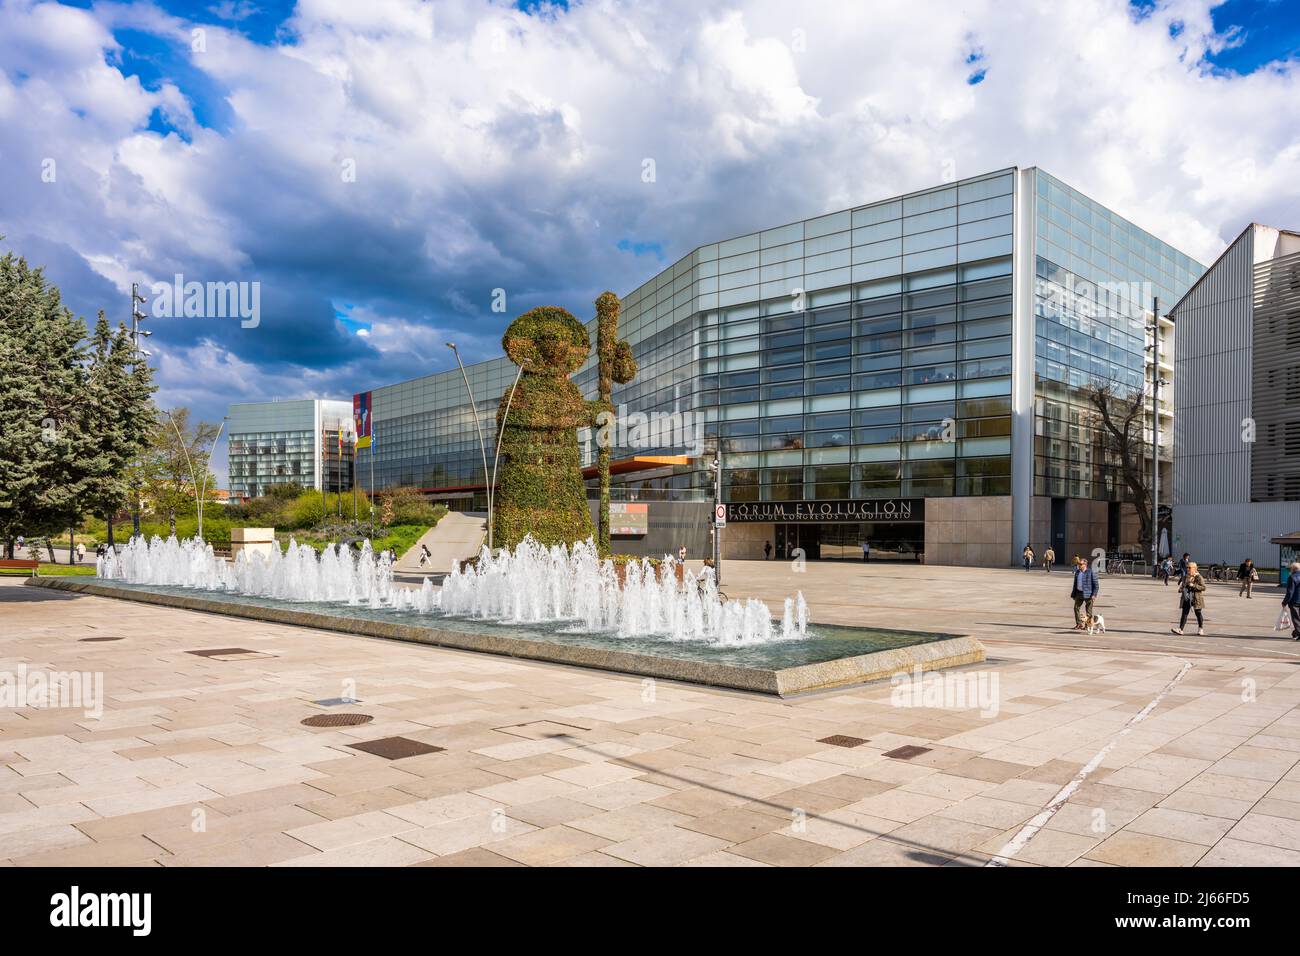 Burgos,Spain - April 26 2022 - Front of the Forum Evolucion Congres center in Burgos. Burgos is a city in northern Spain and the historic capital of C Stock Photo